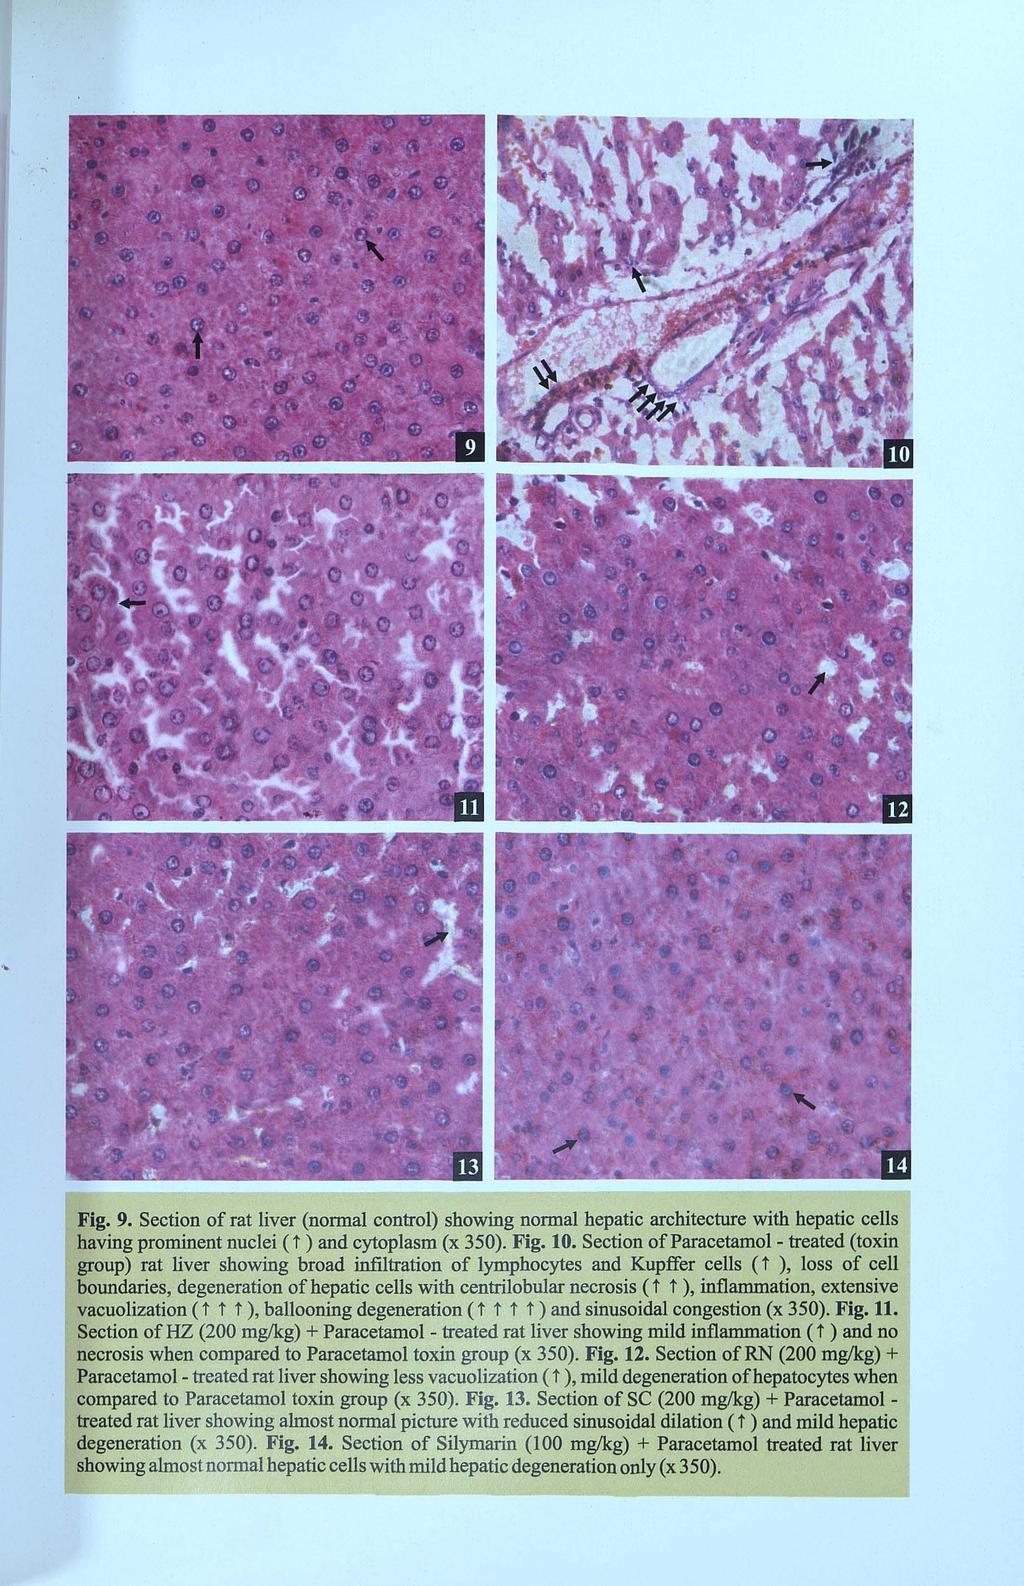 ... Fig. 9. Section of rat liver (normal control) showing normal hepatic architecture with hepatic cells having prominent nuclei (t ) and cytoplasm (x 350). Fig. 10.